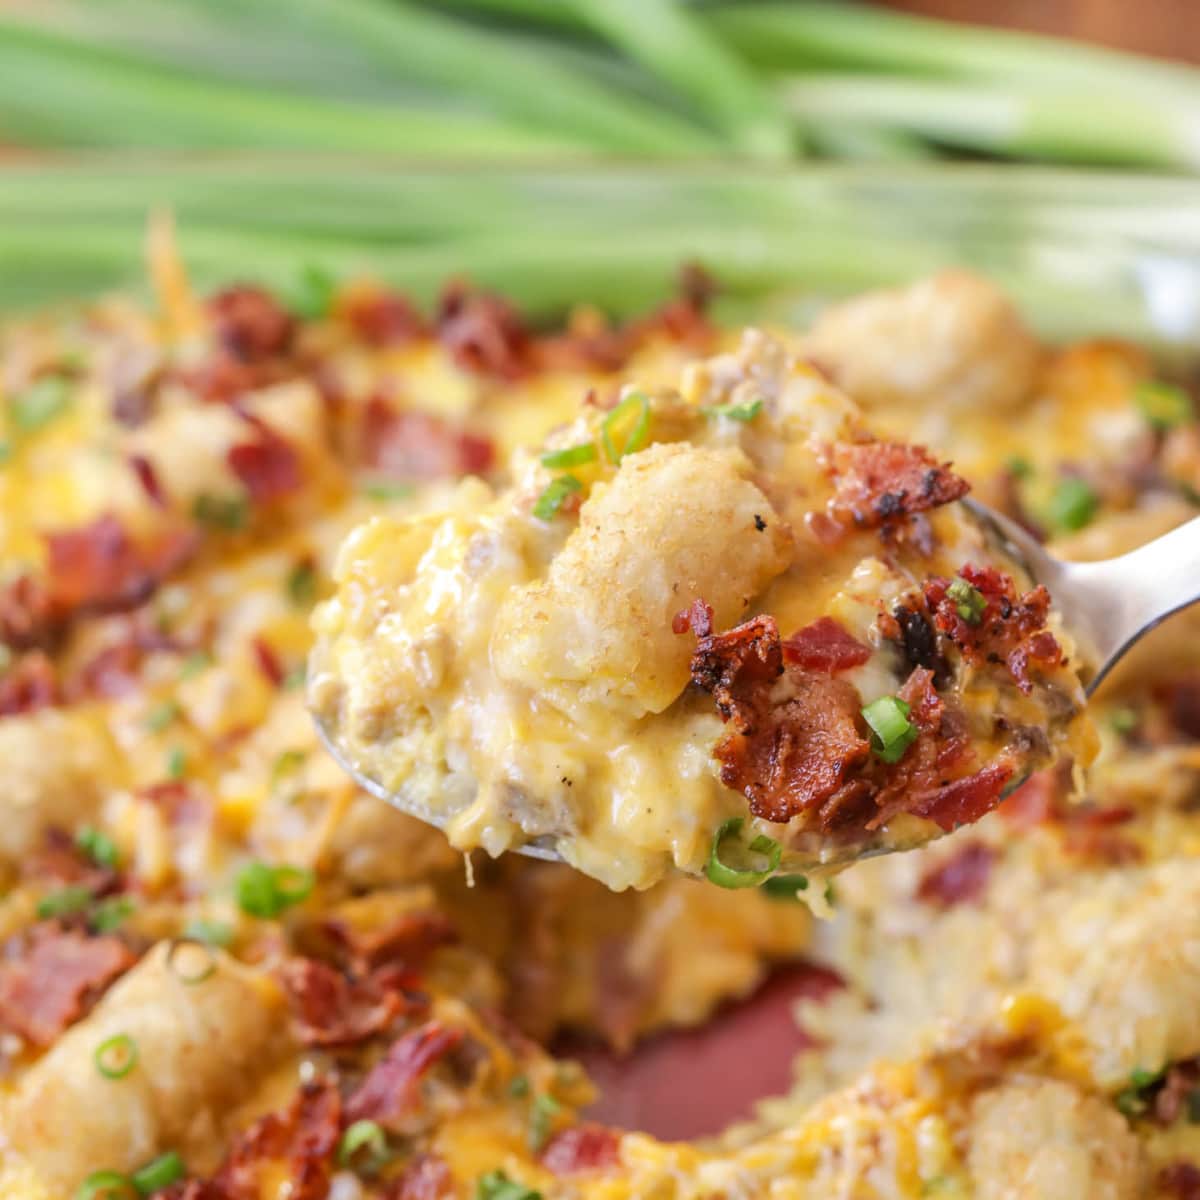 Breakfast for dinner - scoop of tater tot breakfast casserole topped with bacon.